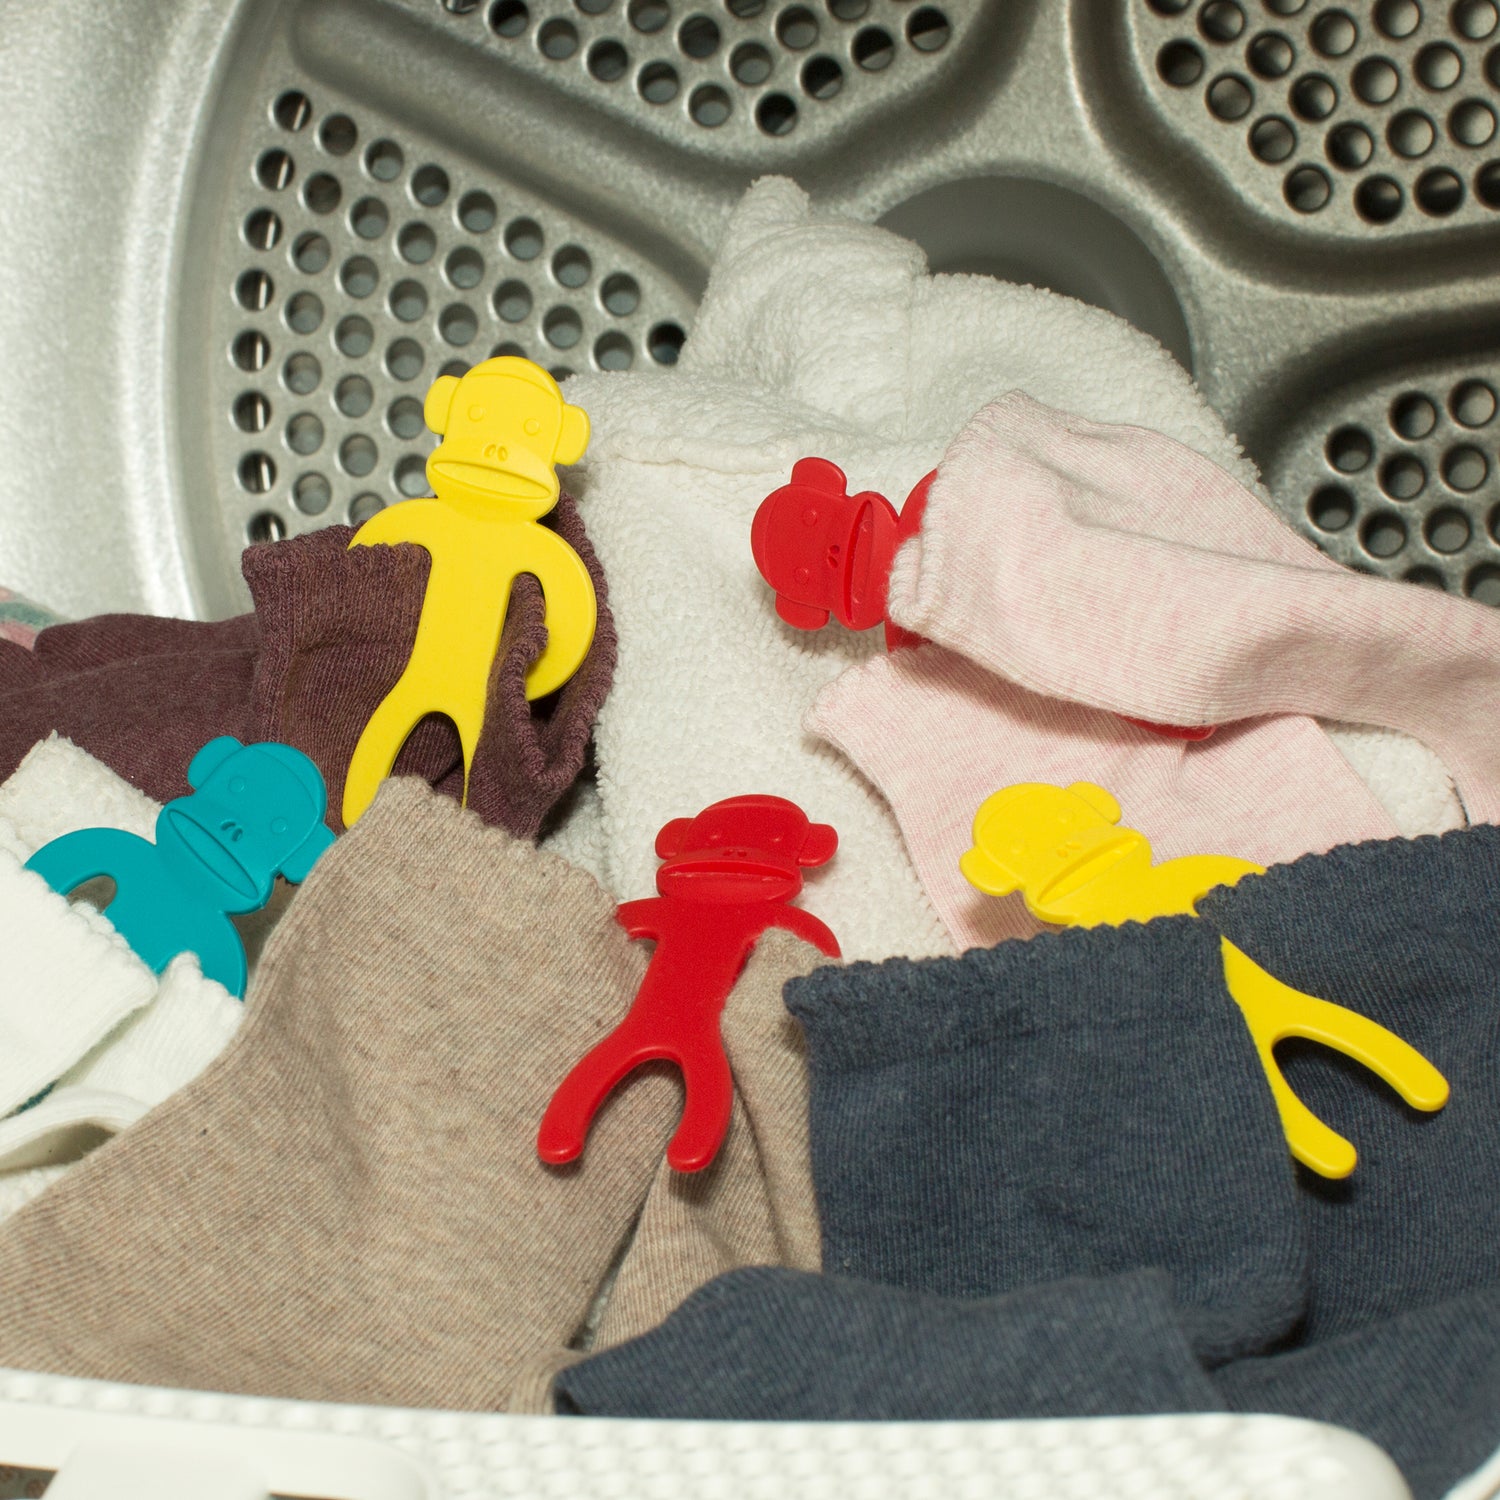 Sock Washing Locks - Sock Clips for Washing Machine, Lost Sock Keeper -  Laundry Tool for Socks - 3-Pack, 8 Pairs Each